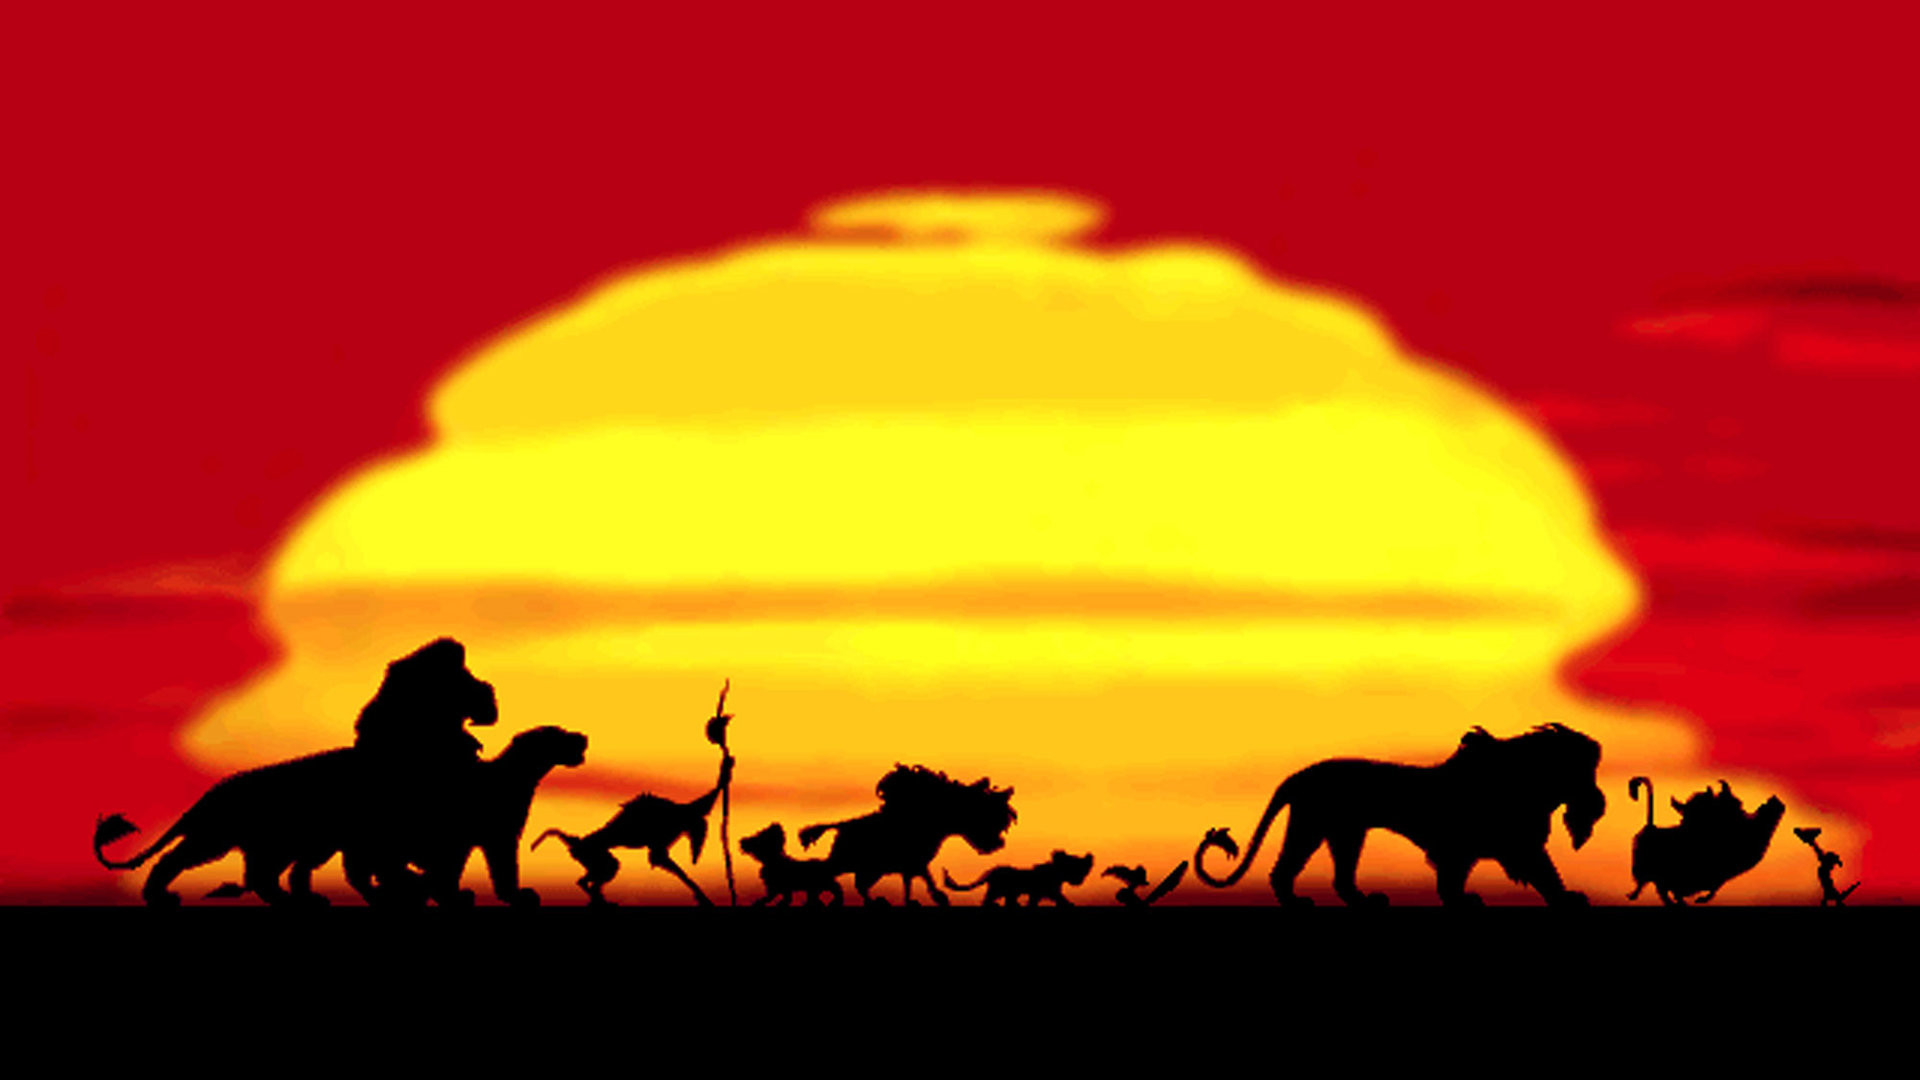 The Lion King Hd Wallpaper Background Image 1920x1080 Id